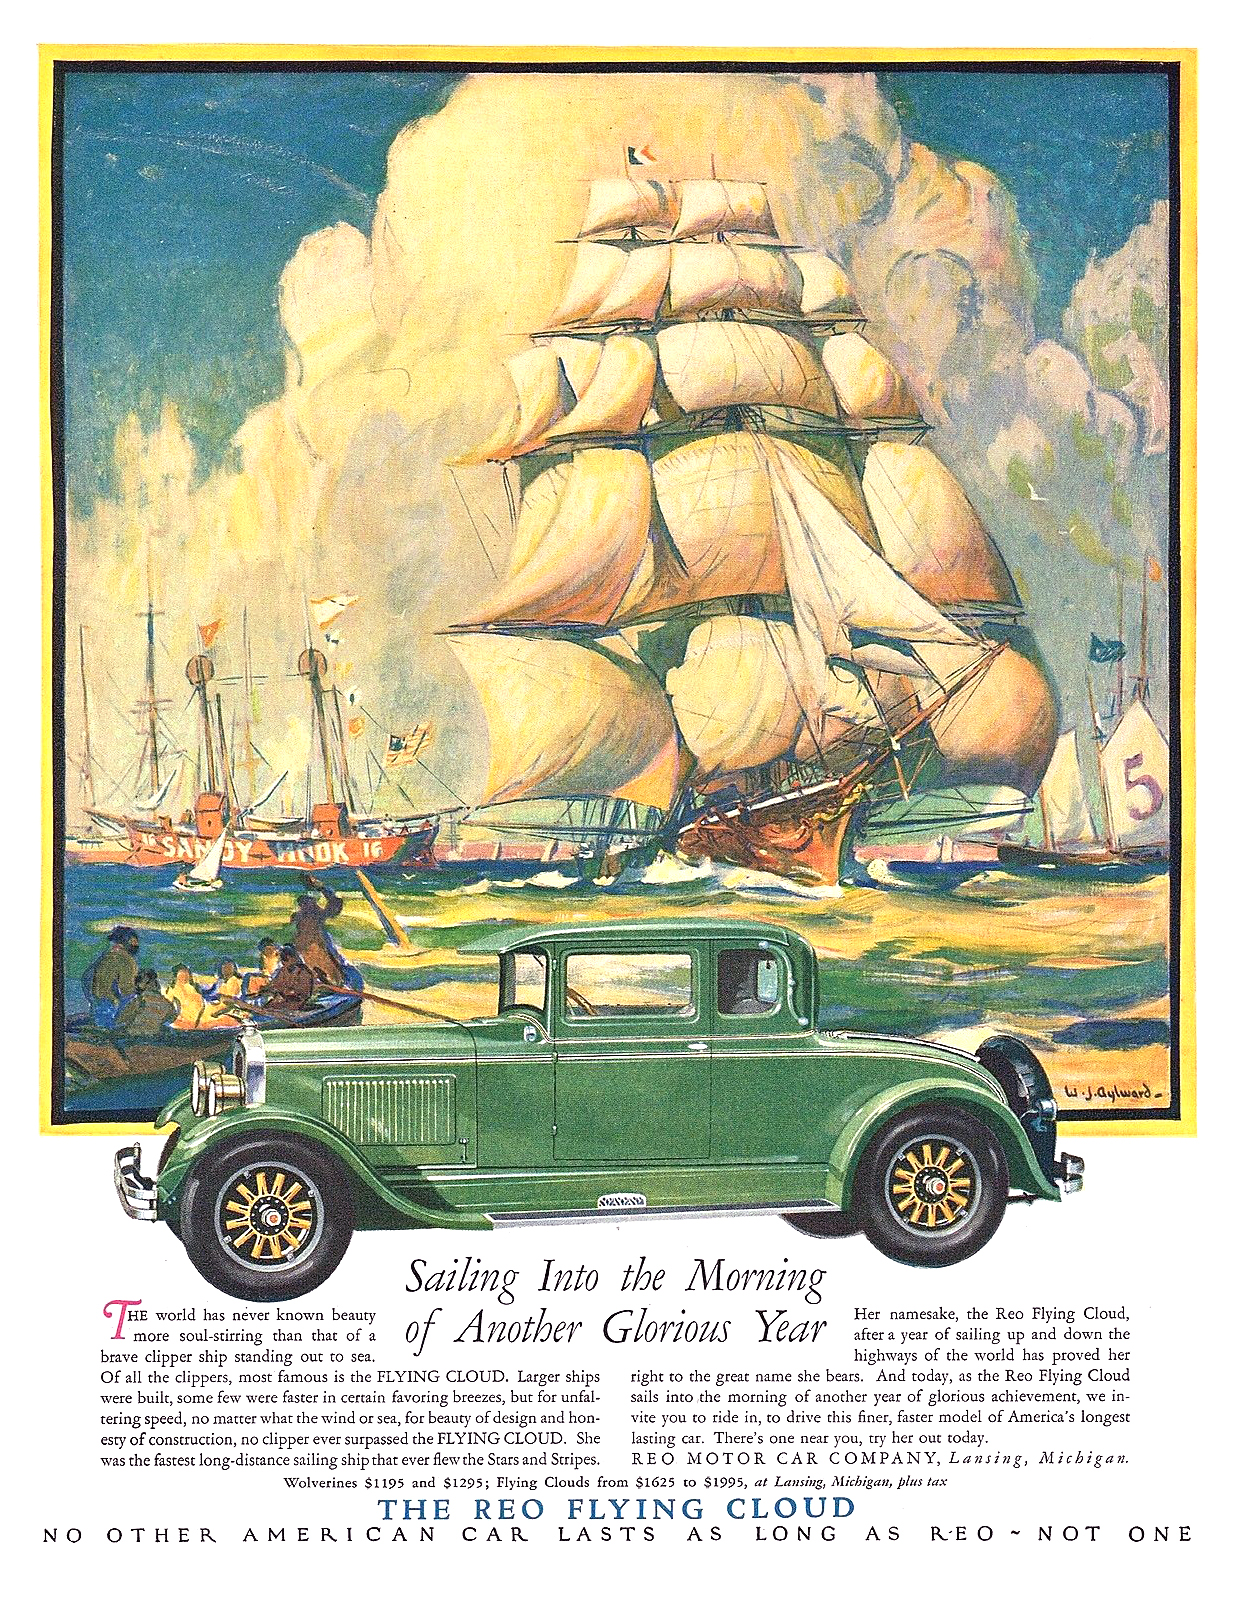 Reo Flying Cloud Ad (January, 1928): Sailing Into the Morning of Another Glorious Year - Illustrated by W. J. Aylward